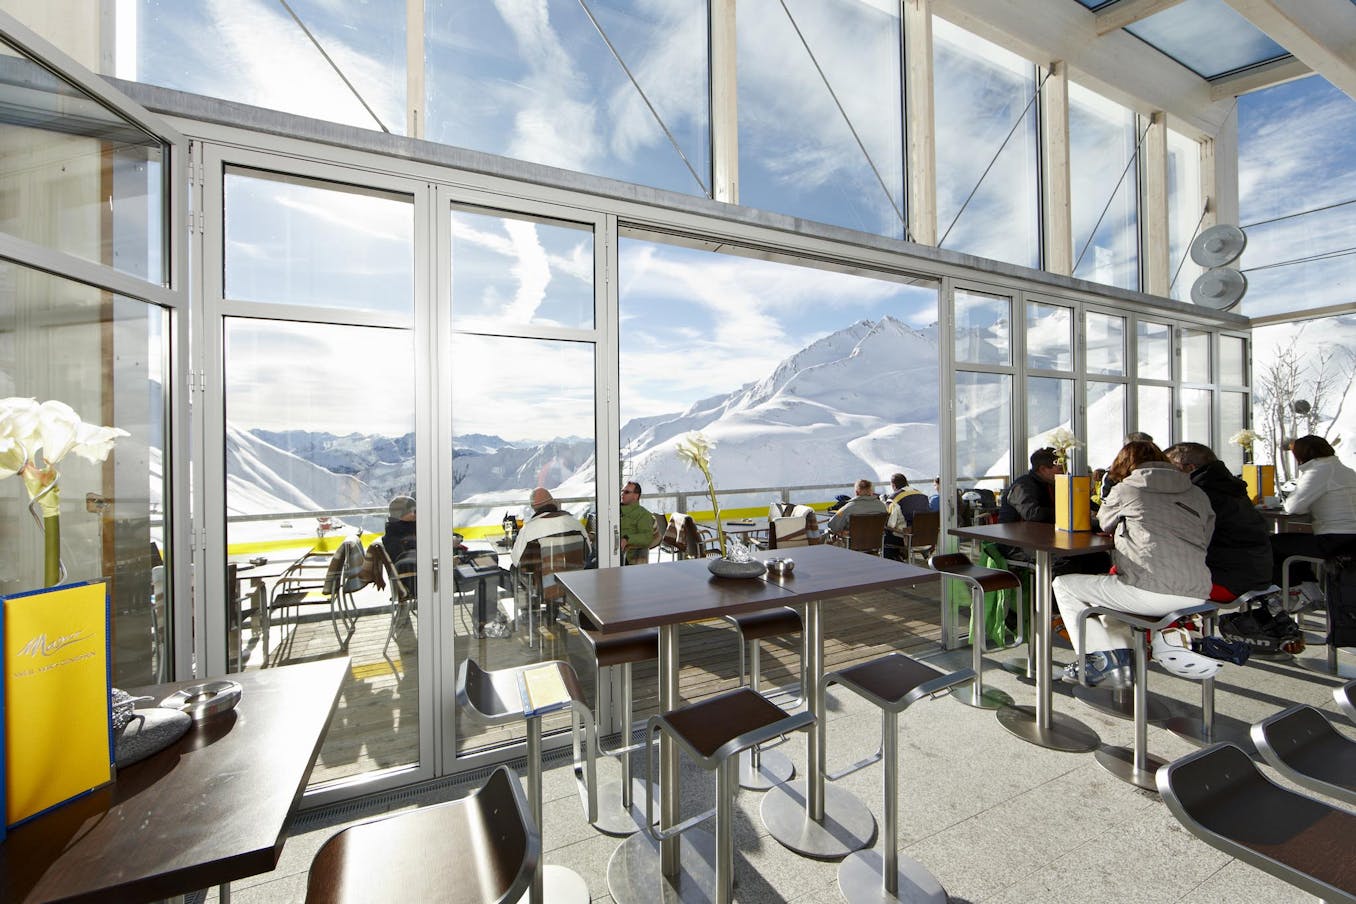 Commercial Large Folding Glass Walls at a Panoramic Bar in Australia - Opening Interior Day View